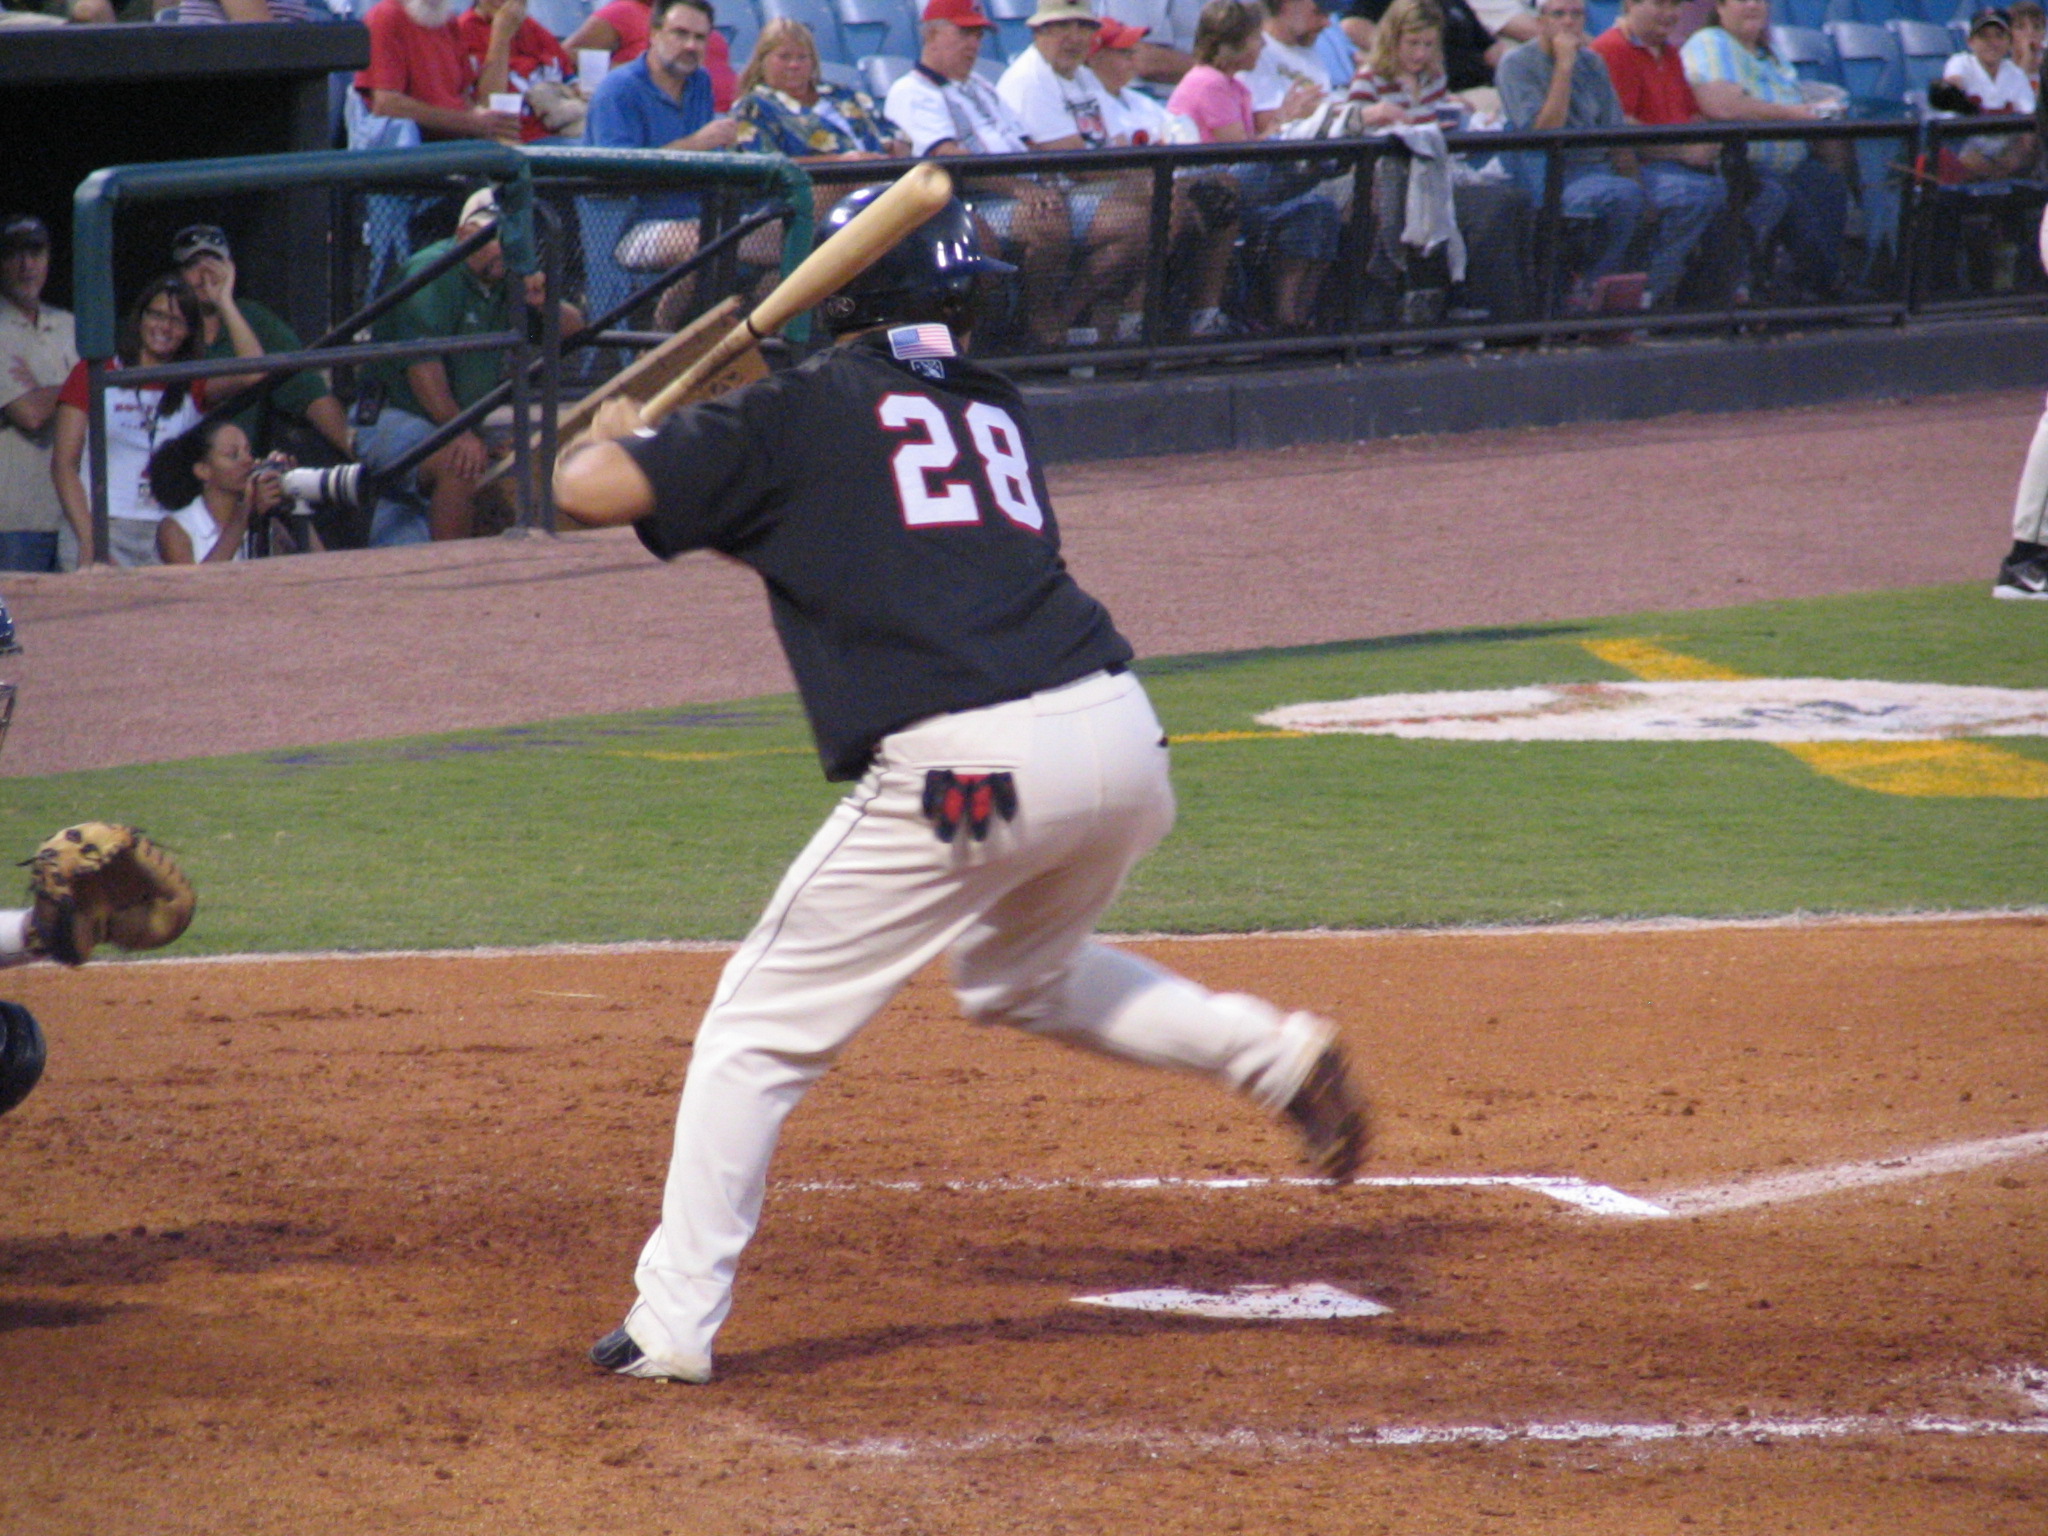 a batter ready to swing the bat at home plate